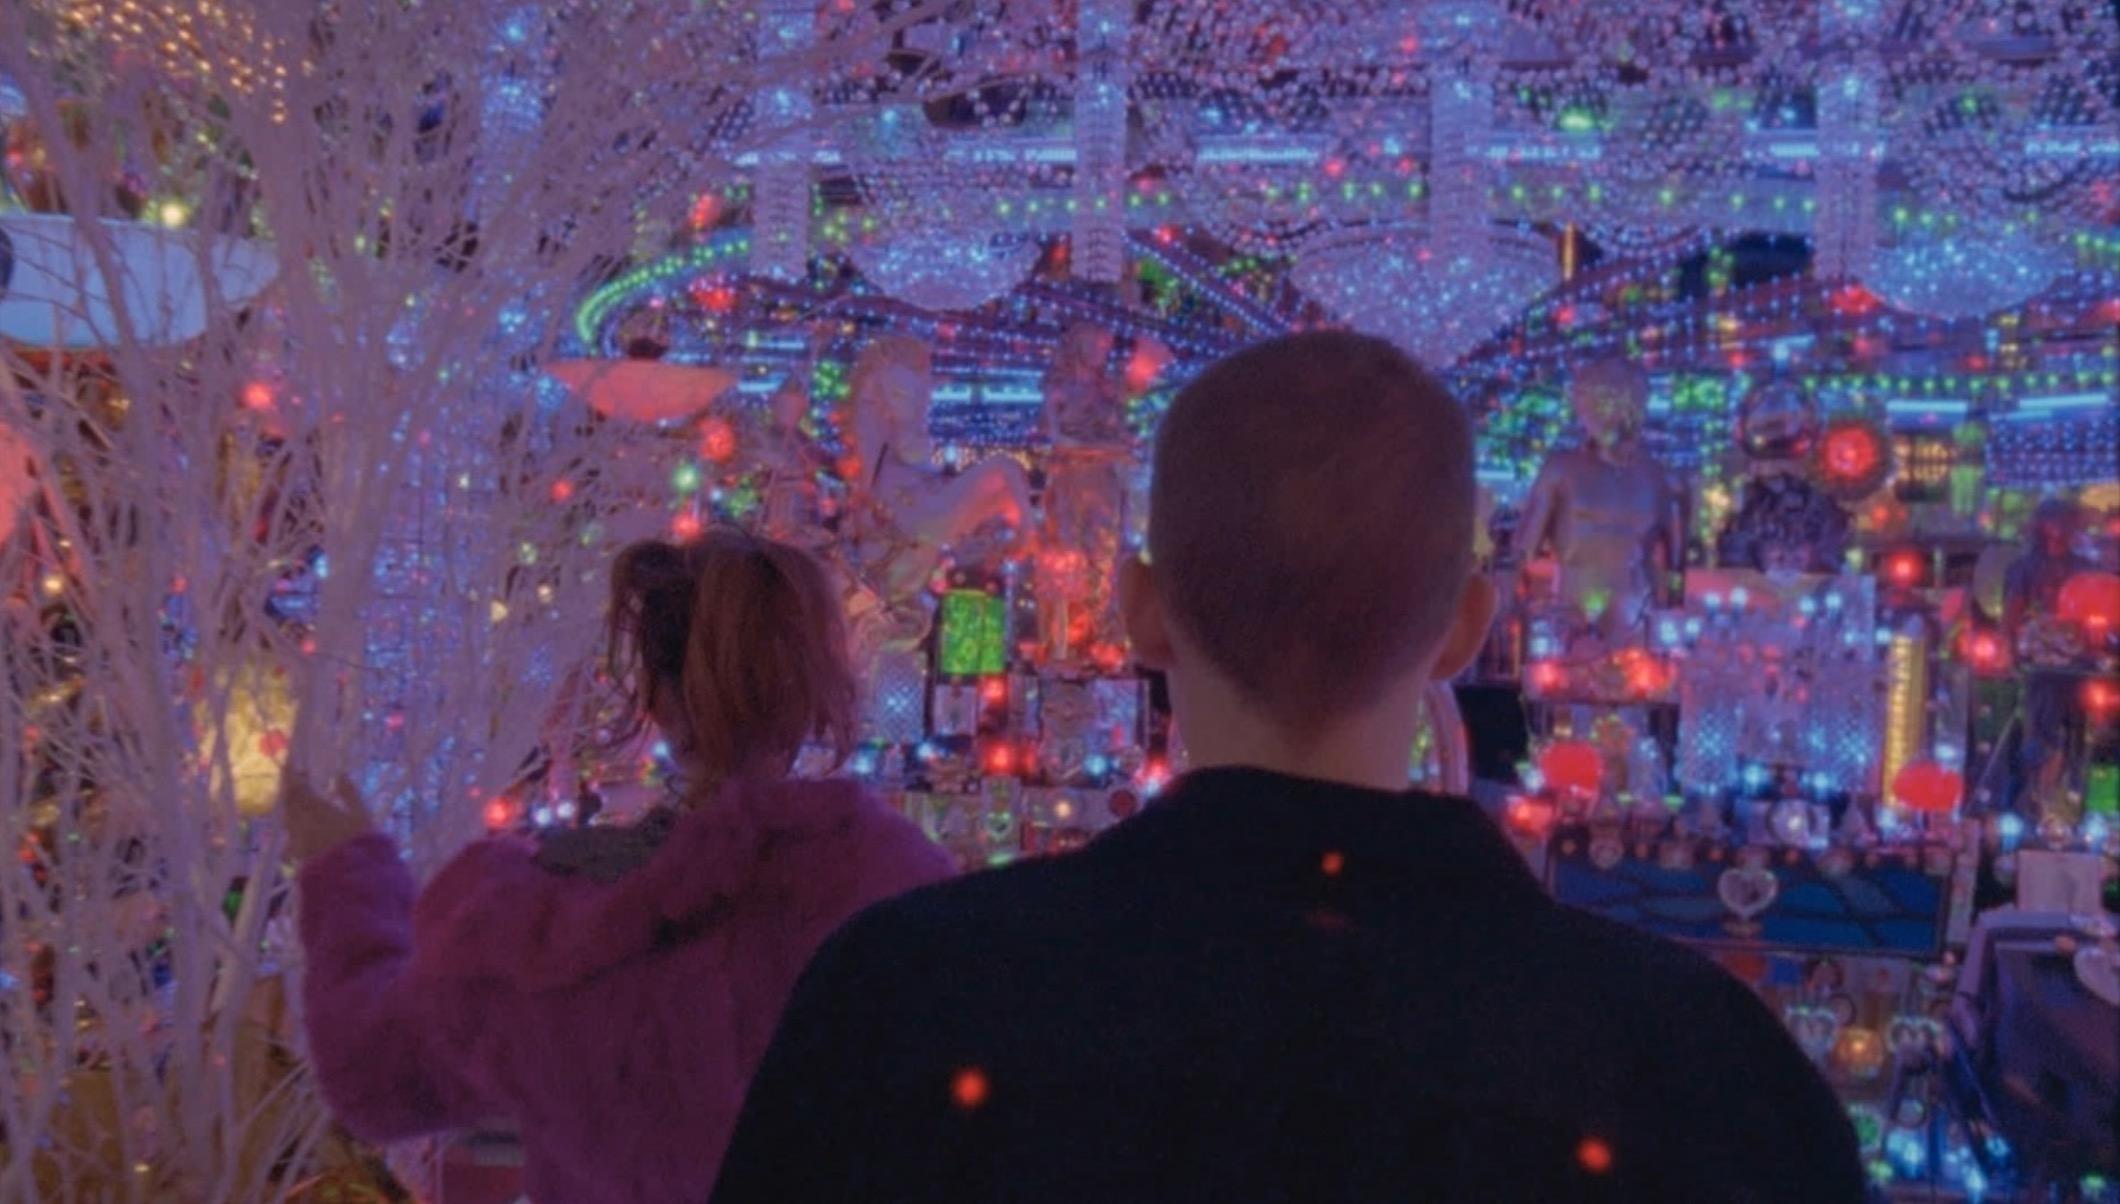 Noé focused on the more hallucinatory aspects LSD in his 2009 film ‘Enter the Void’ (Wild Bunch)